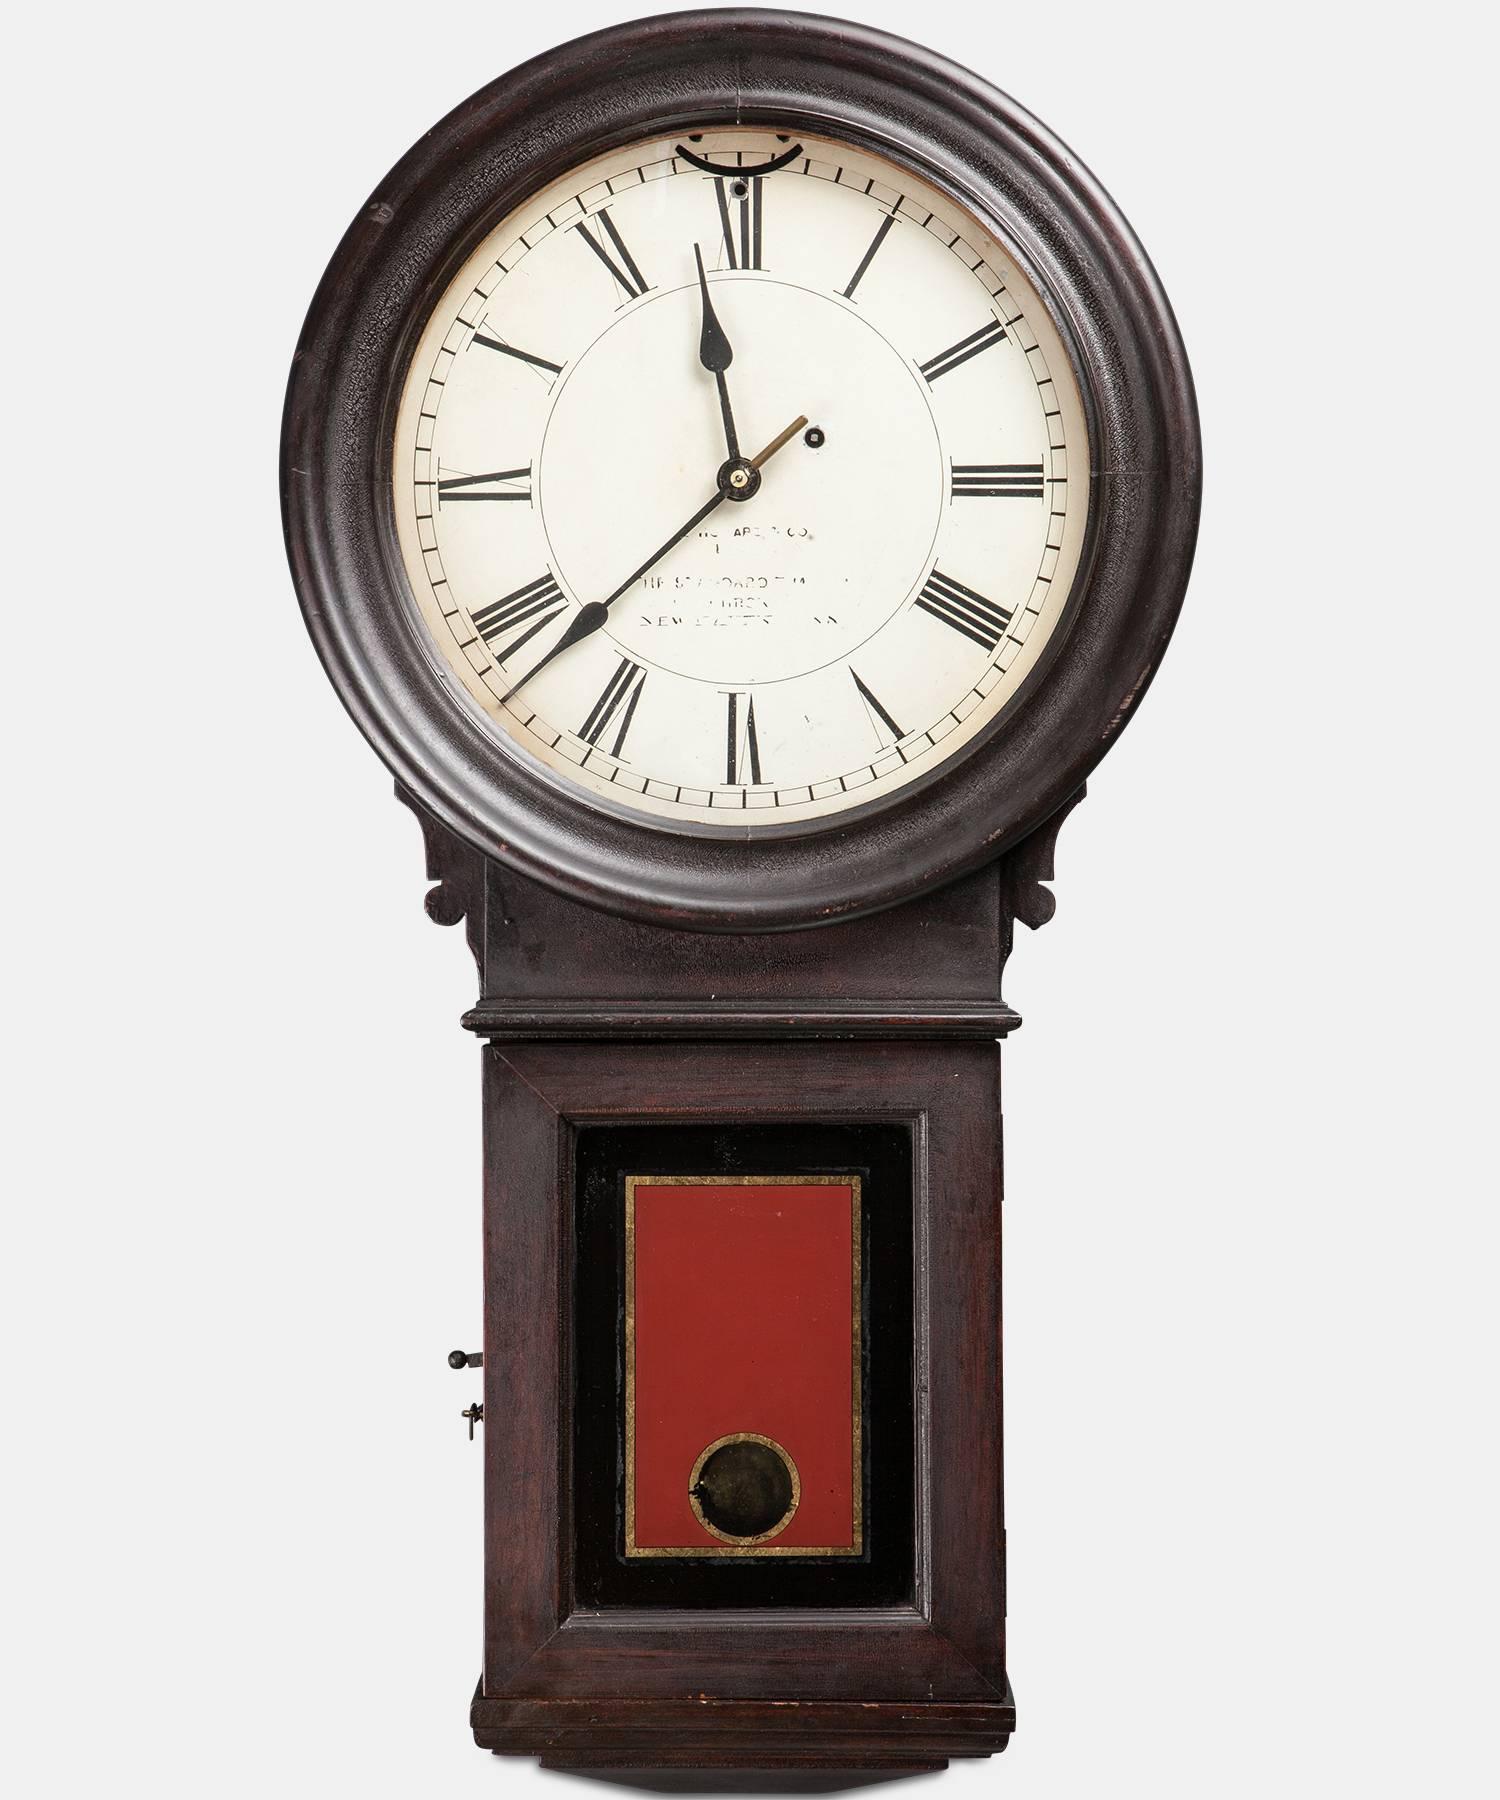 Model #70, pendulum clock with iron weight. In completely original condition with walnut case, painted zinc dial, gold leaf and red painted throat glass. 

Manufactured by E. Howard & Co. Boston, circa 1900.